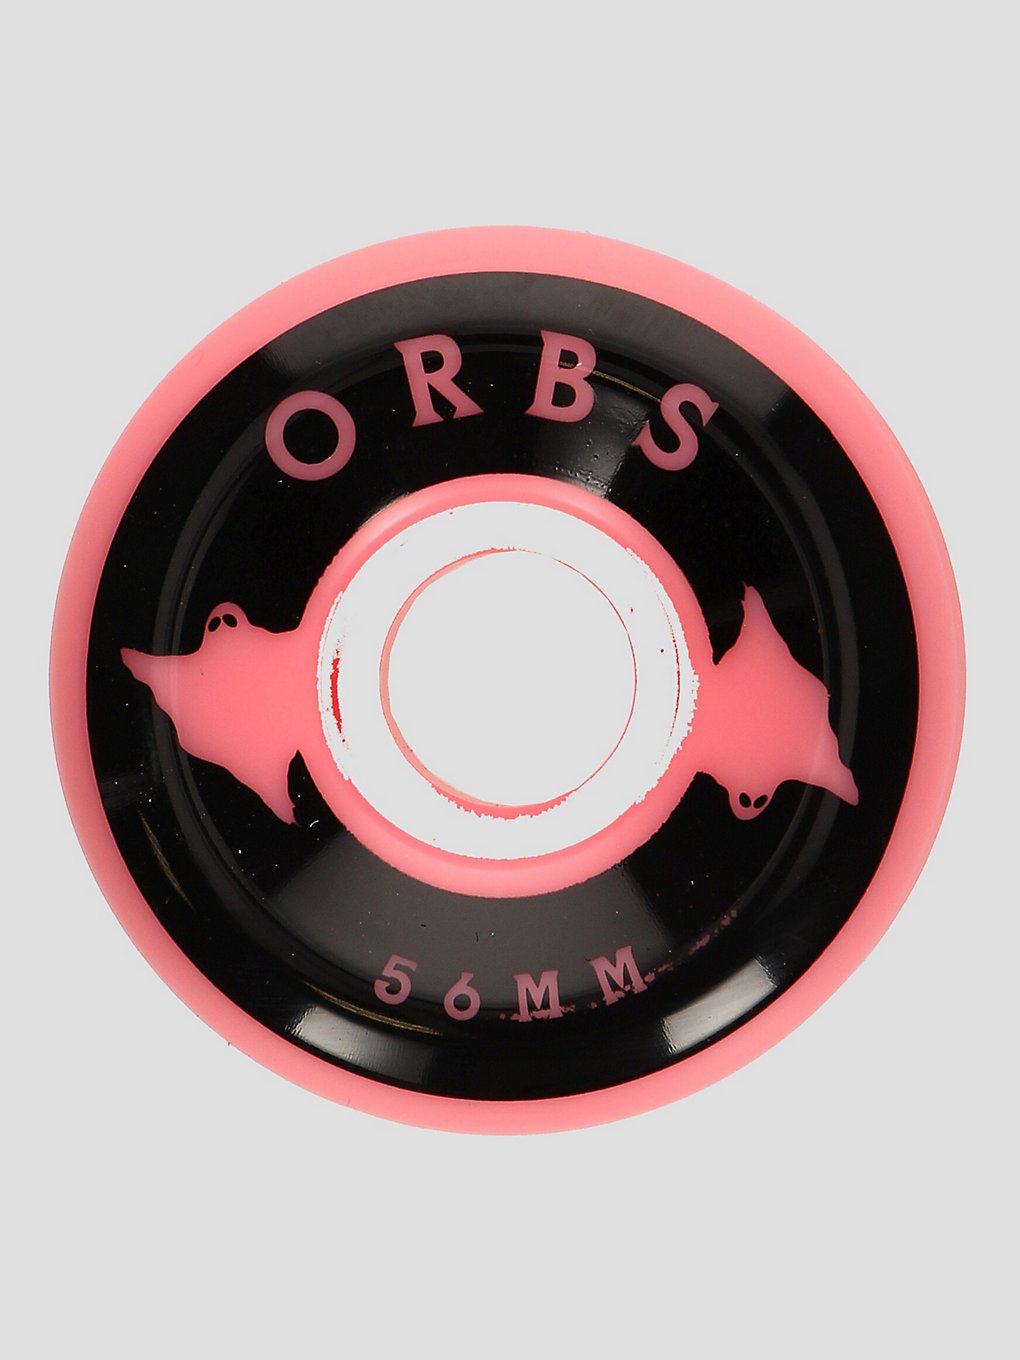 Welcome Orbs Specters - Conical - 99A 56mm Rollen neon coral kaufen